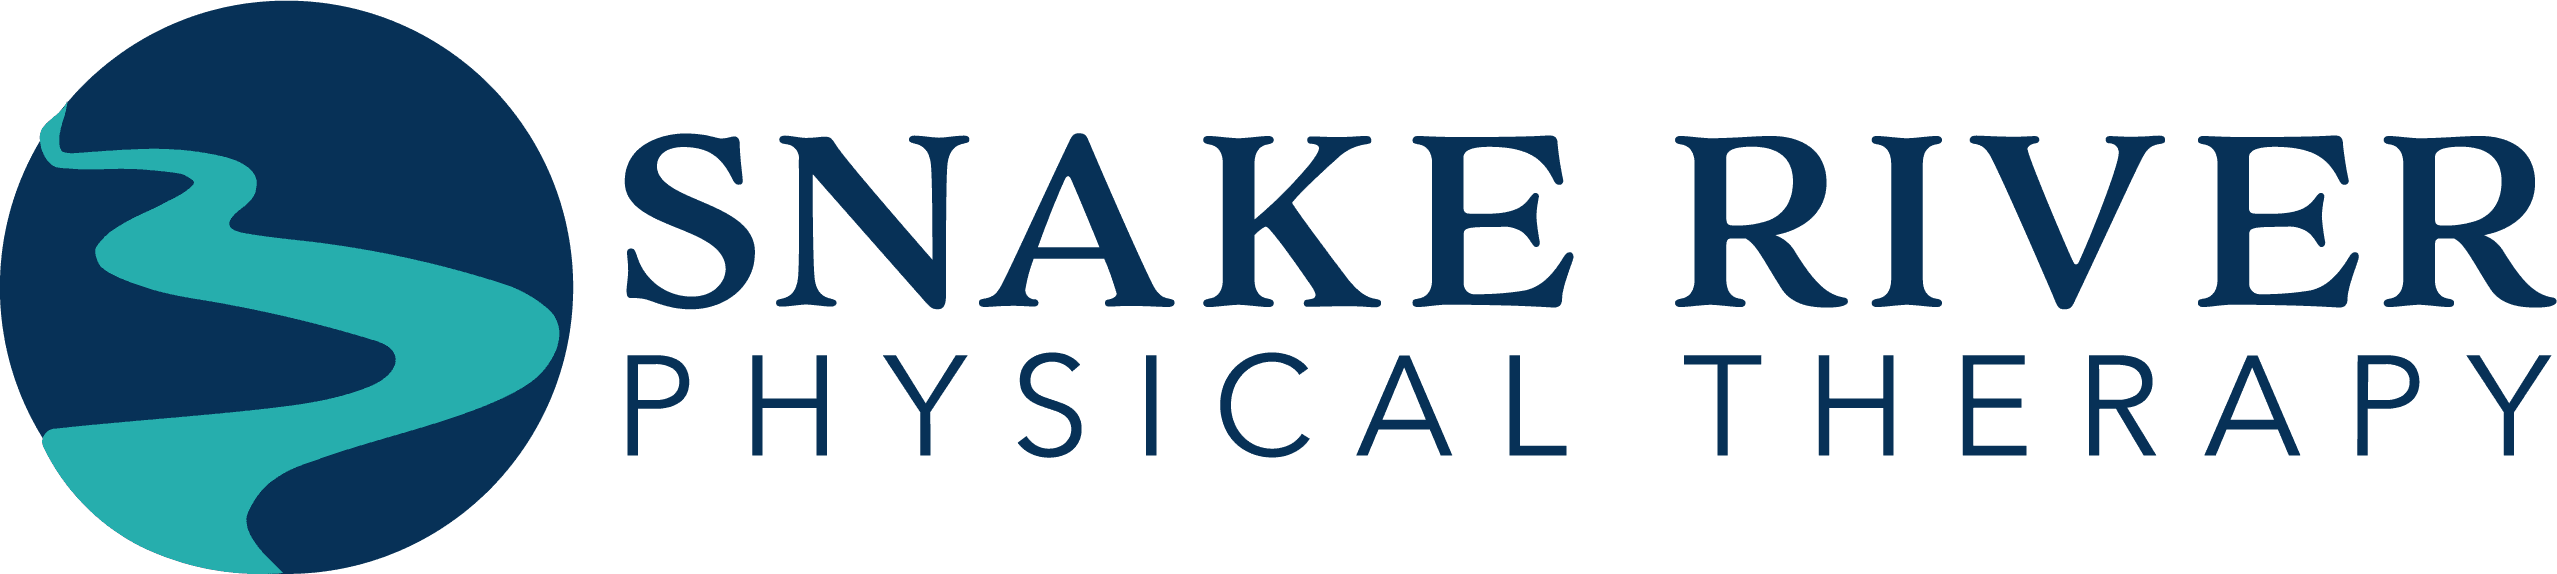 Snake River Physical Therapy Specialists